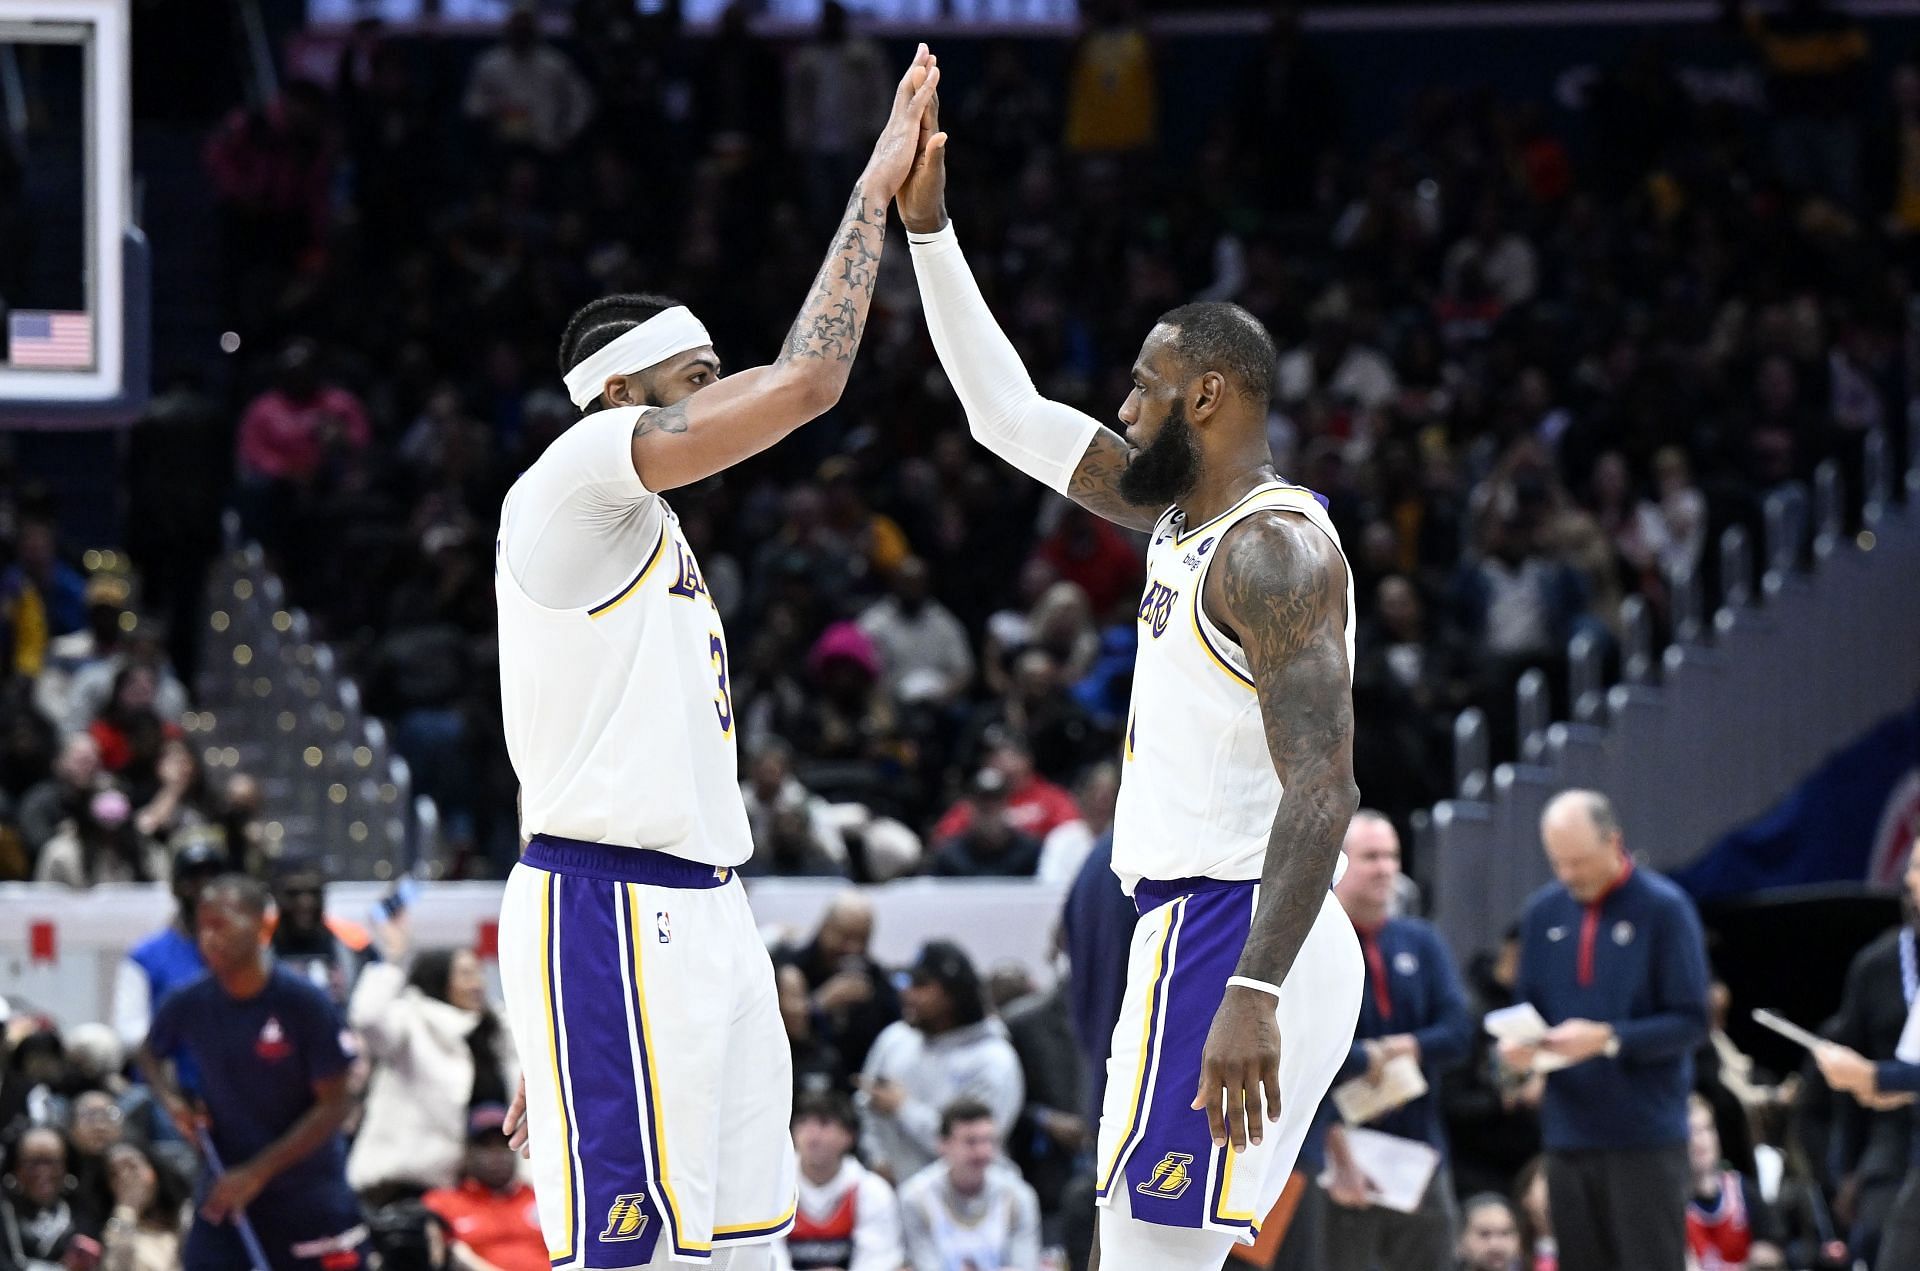 Are Anthony Davis and LeBron James playing tonight against Mavericks? Latest injury update on Lakers’ stars ahead of matchup (17th March 2023)